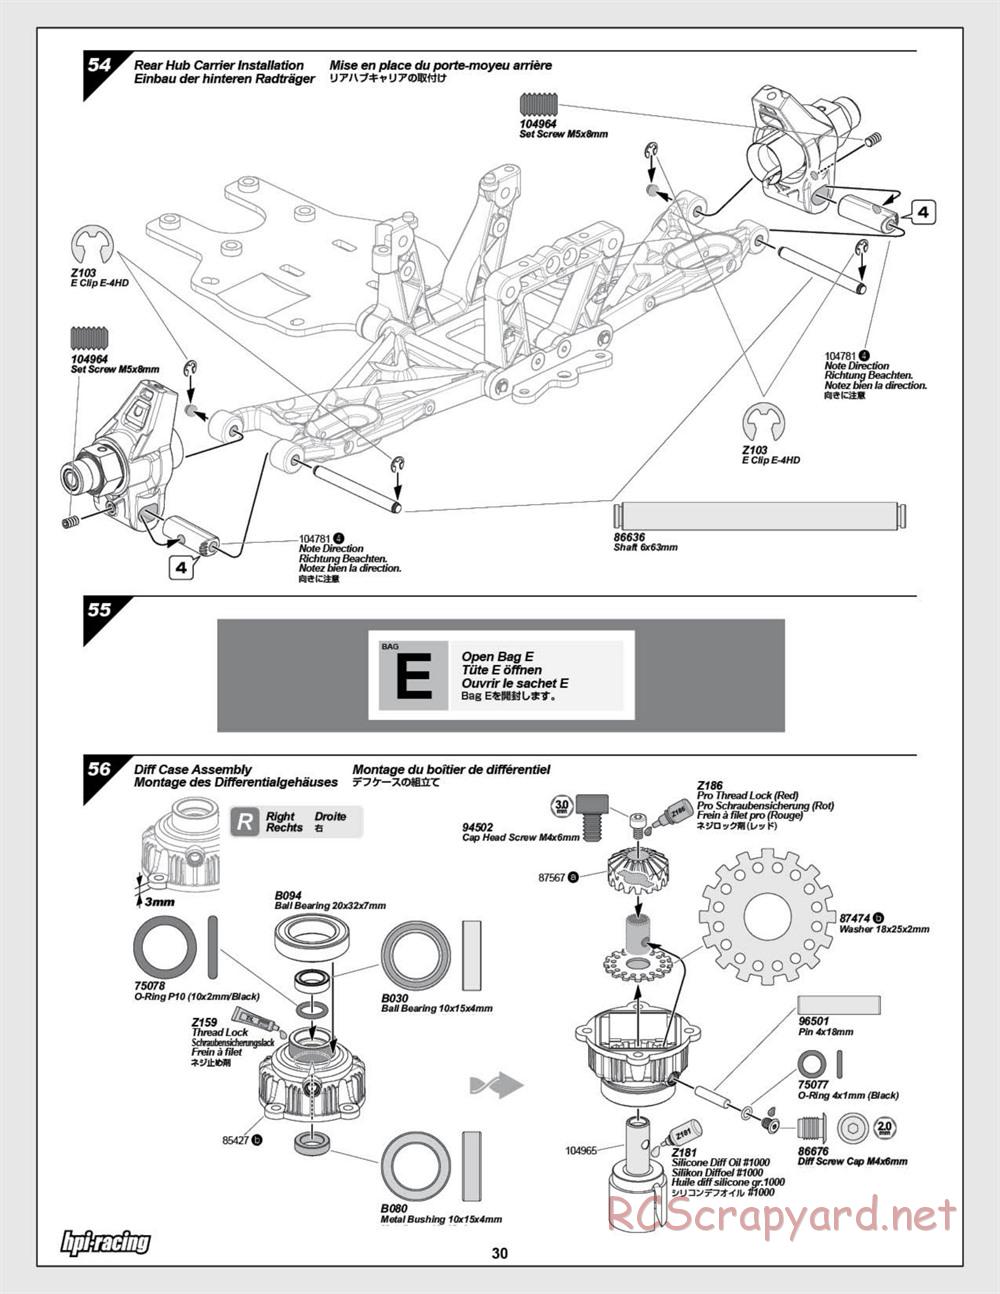 HPI - Baja 5SC SS - Exploded View - Page 30